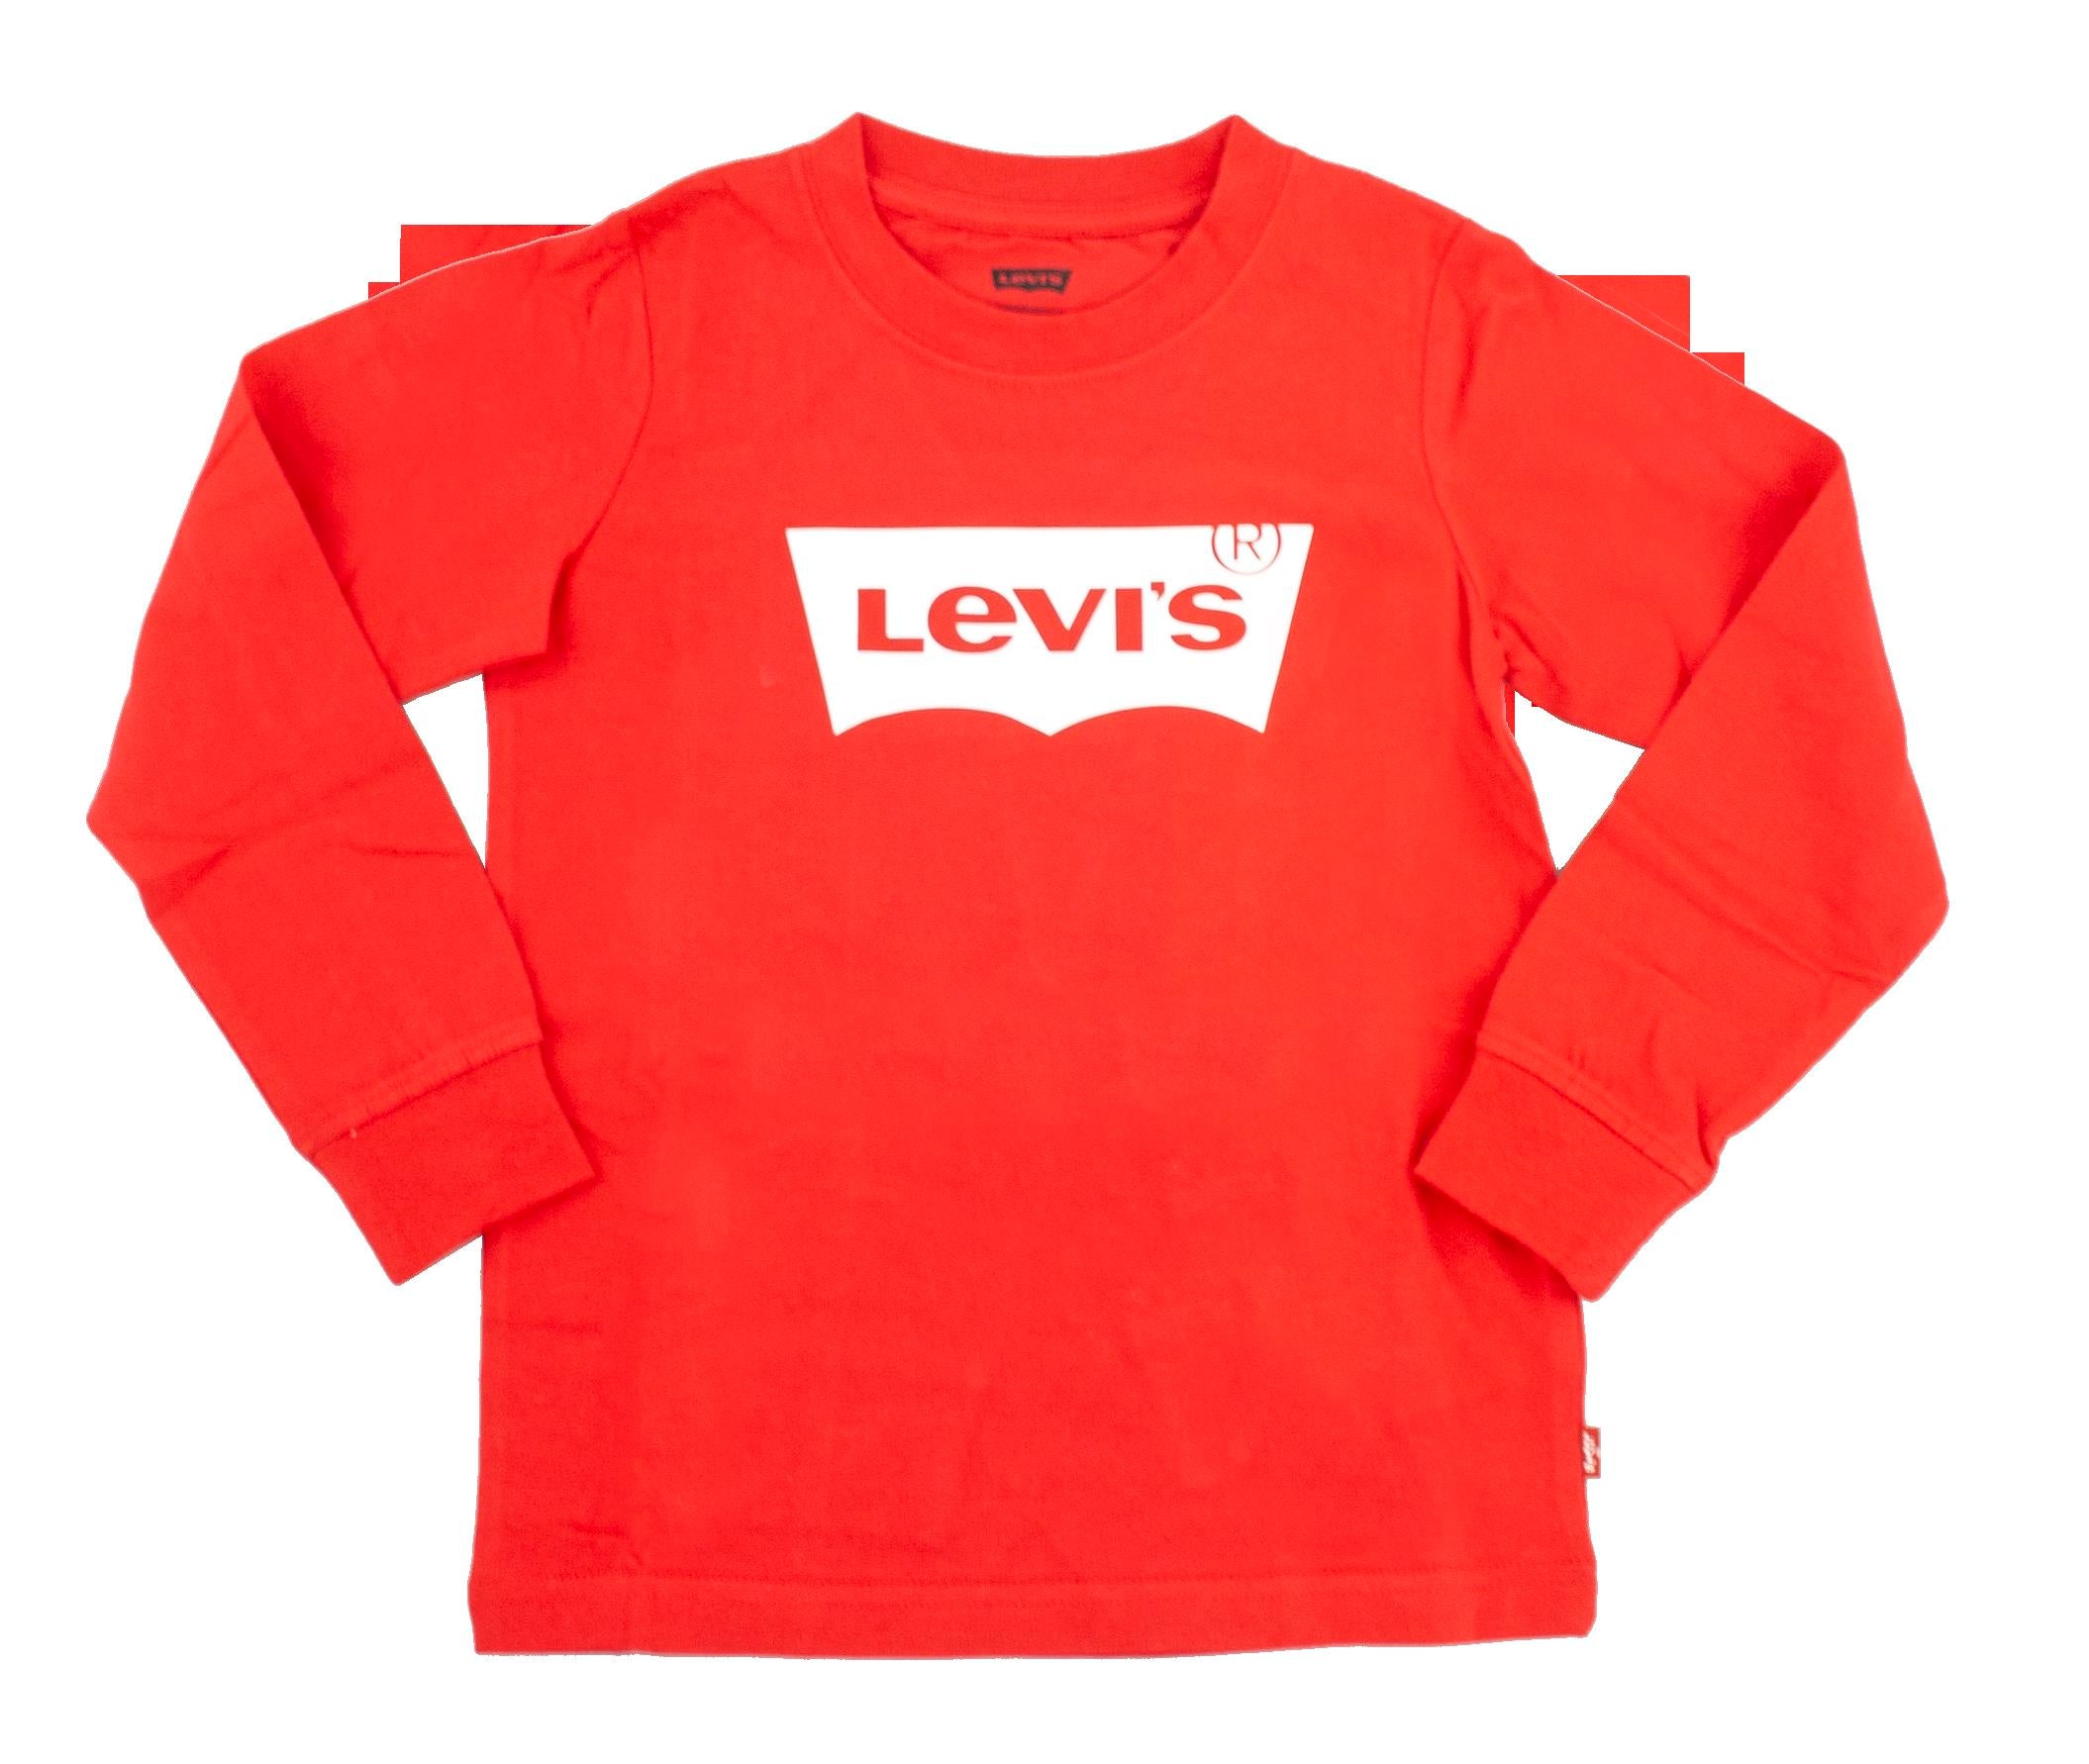 LEVI'S
Levi's Batwing red long sleeve t-shirt